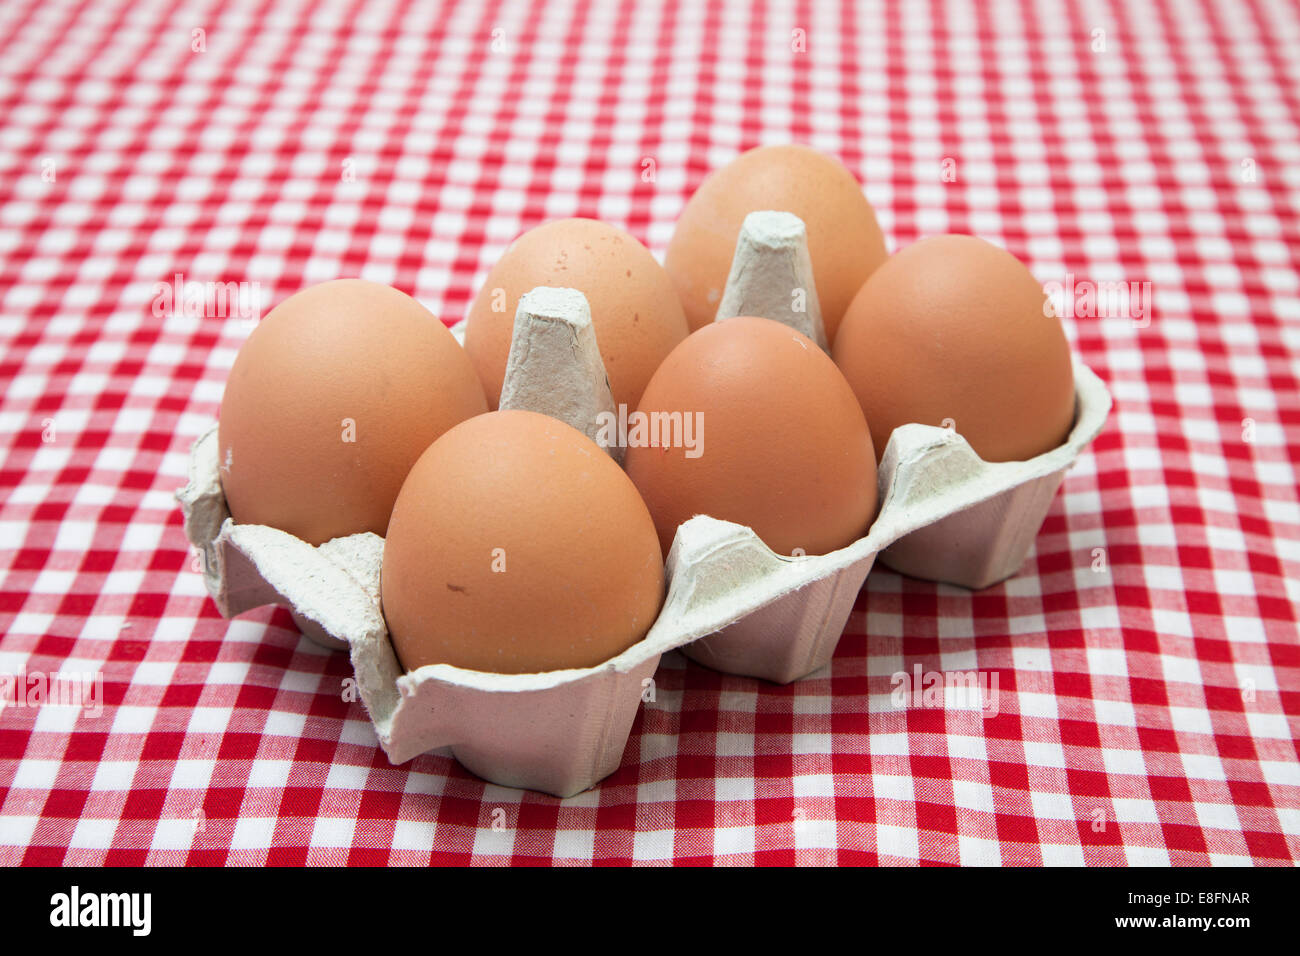 Close-up of six eggs in an egg carton on a checked tablecloth Stock Photo